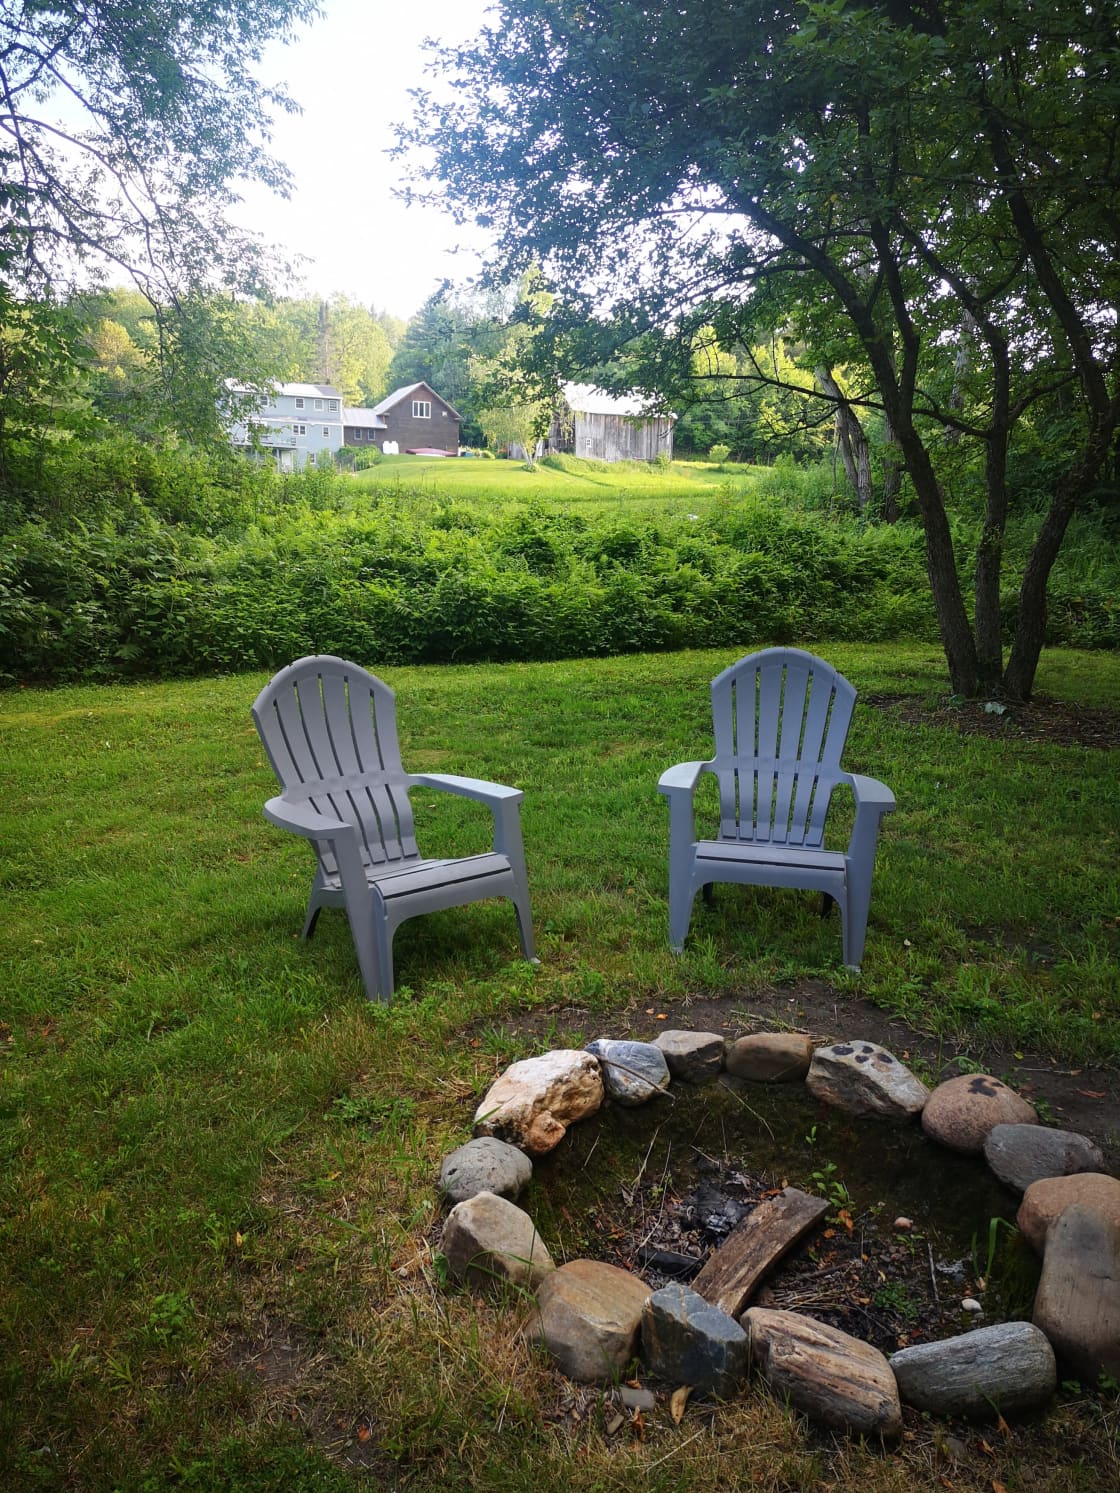 Nice firepit, beautiful trees and comfortable chairs. The camping site is right between Chris's farm and a nice little stream. At night we even saw fireflies in the bushes and fields! Loved it.